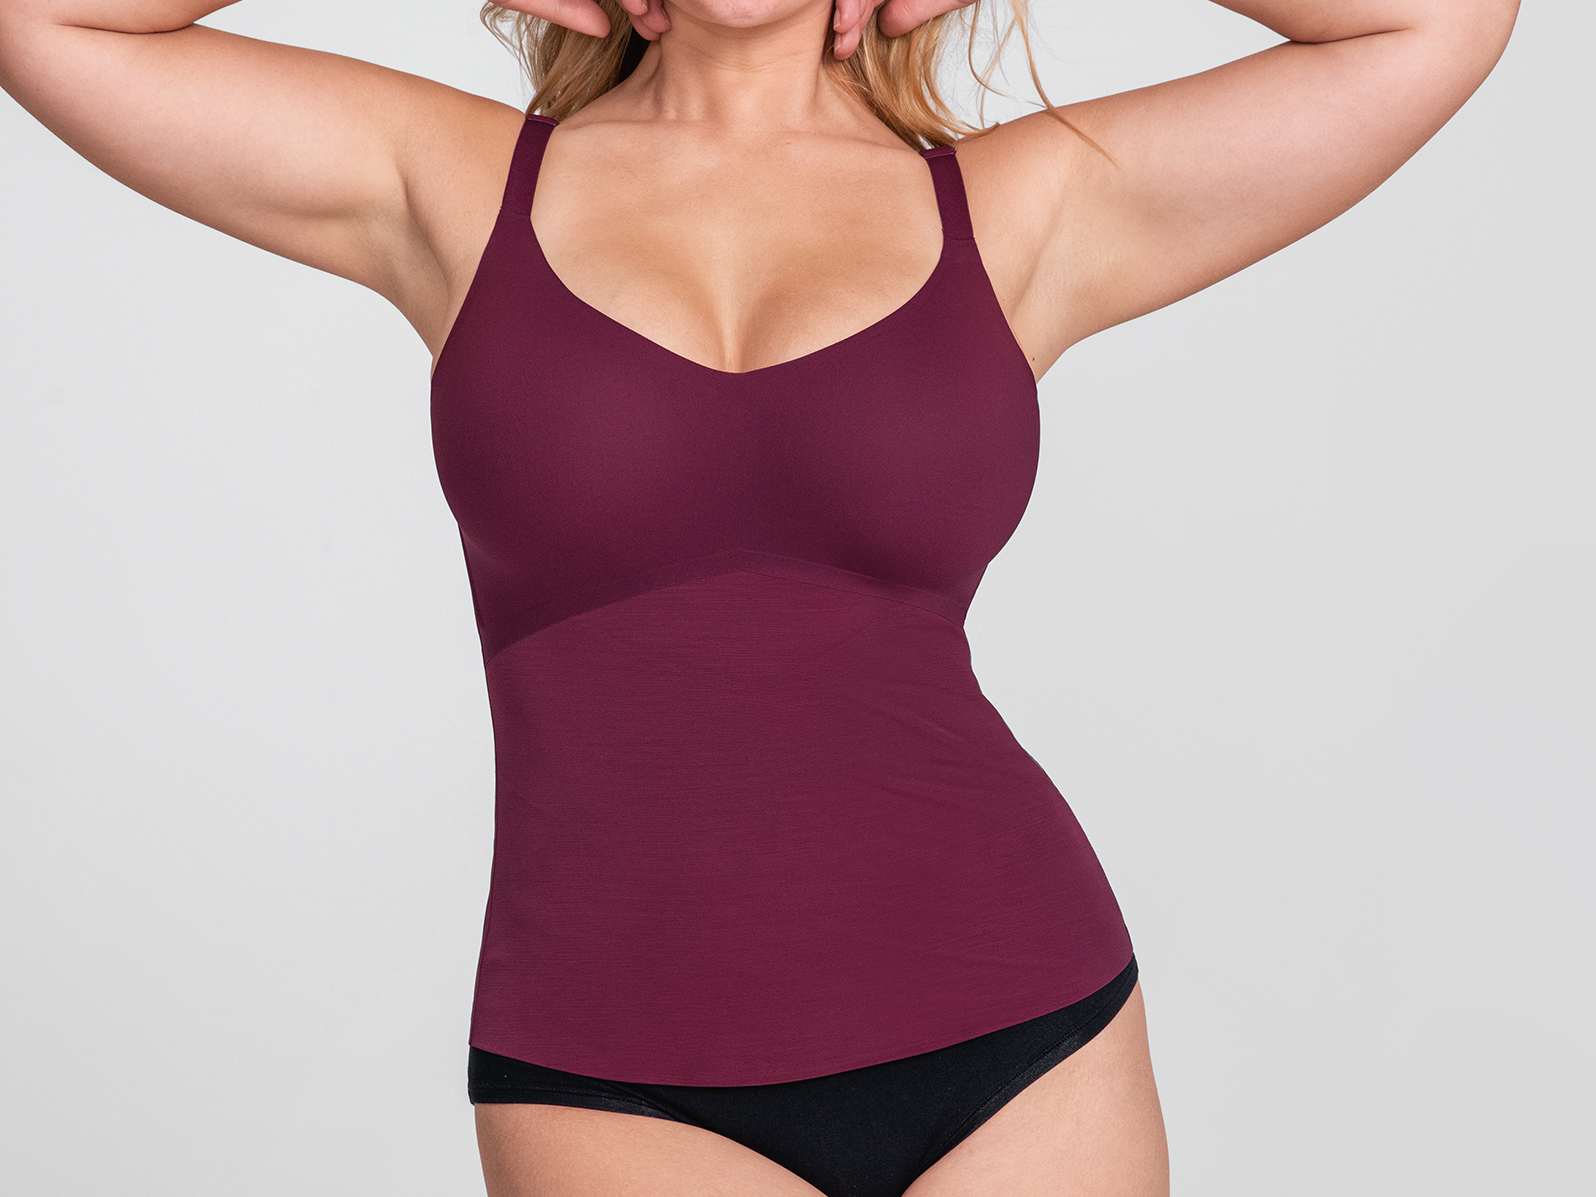 Authentic goods are sold online Body Contour Bodysuit Women'S Shapewear  Waist Cinchers Women One Piece Bodysuit Shaping Underwear For Women Under  20.00 Dollar Items For Women Items Under $10 Same Day Delivery